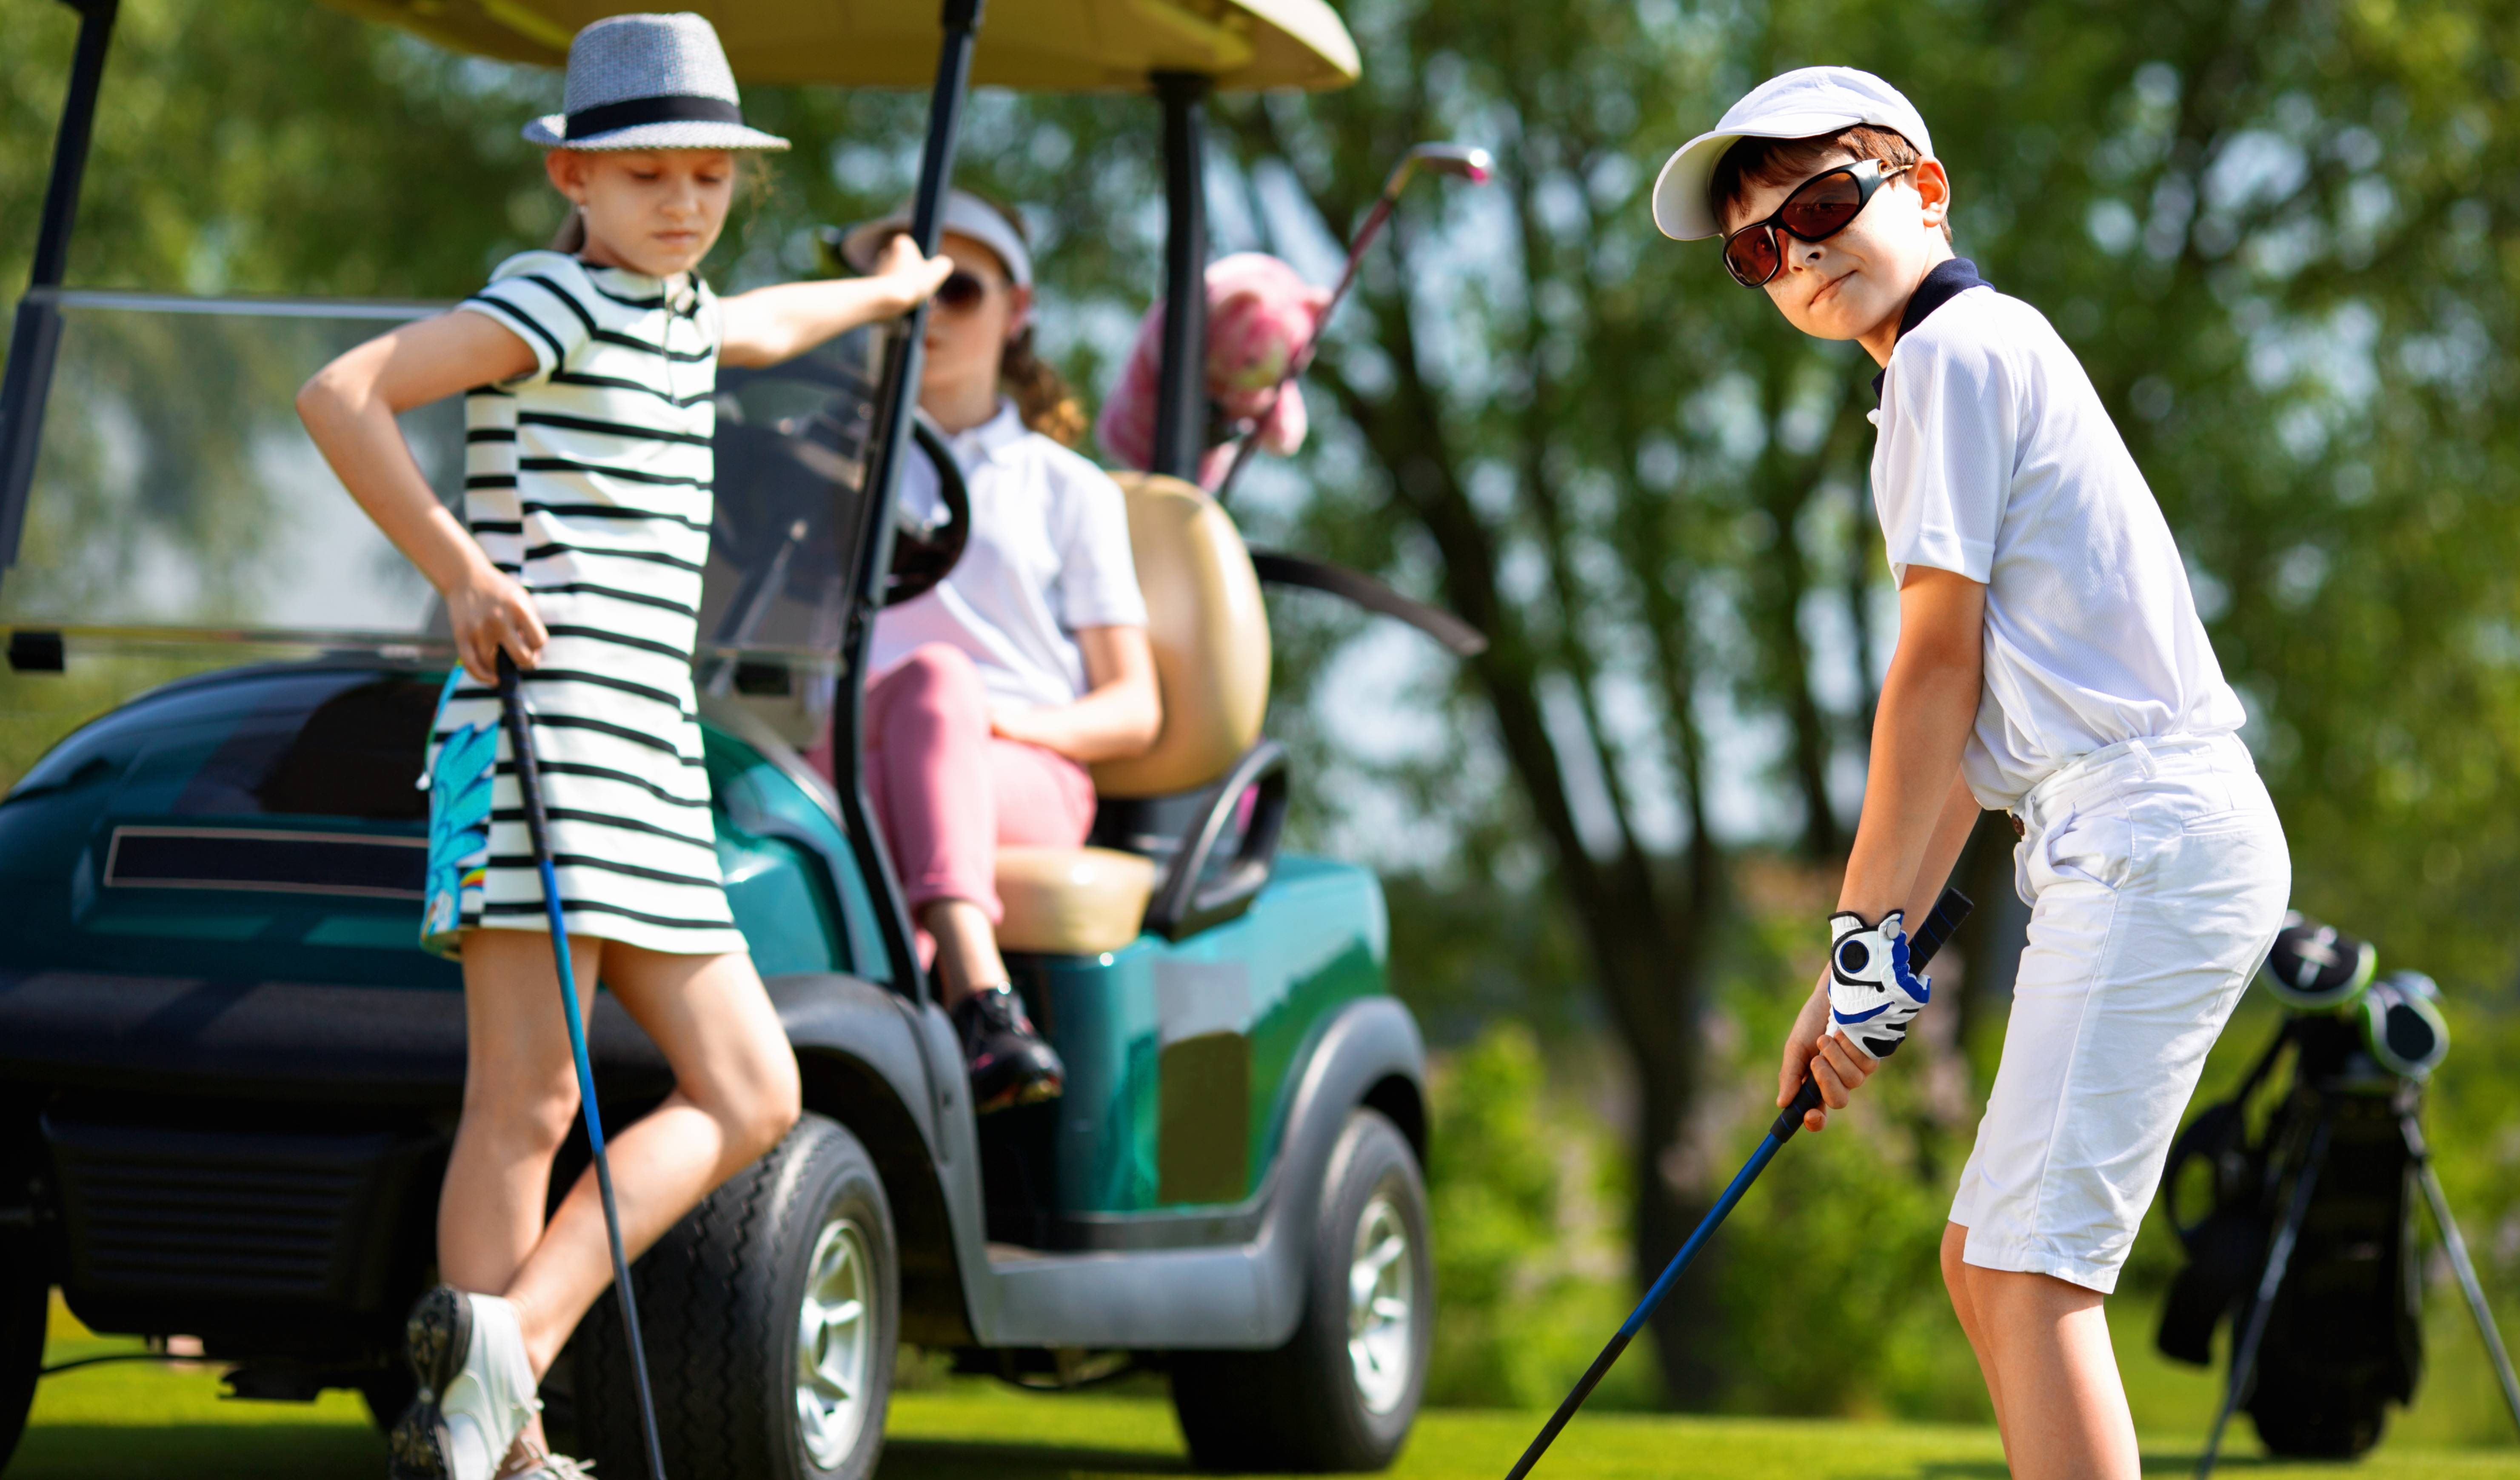 Kids playing golf with cart